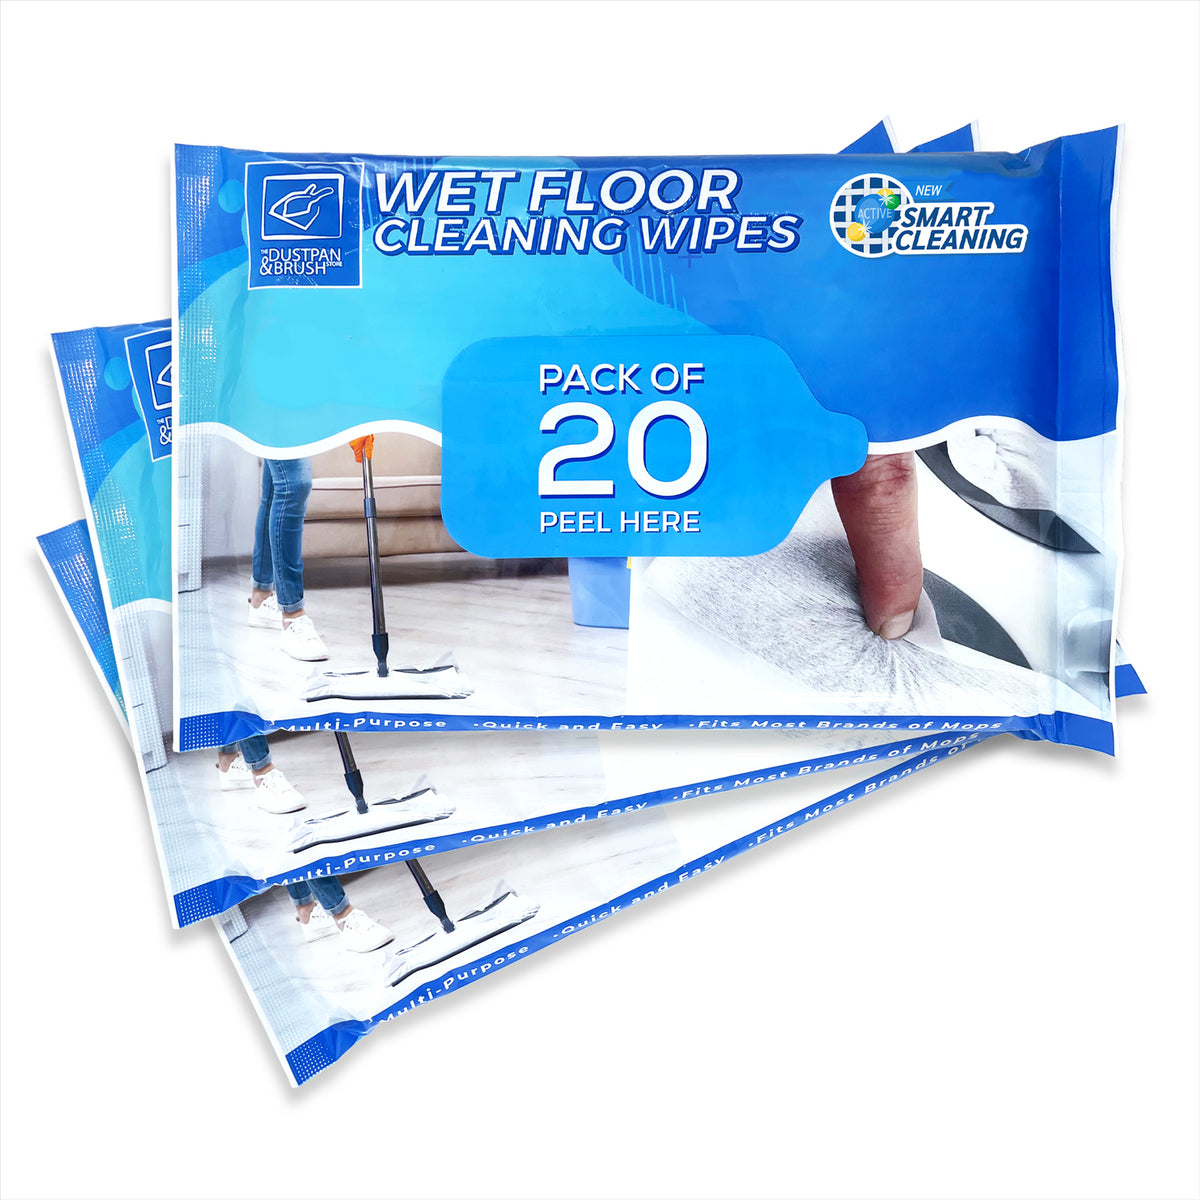 Wet Floor Cleaning Wipes - Pack of 3